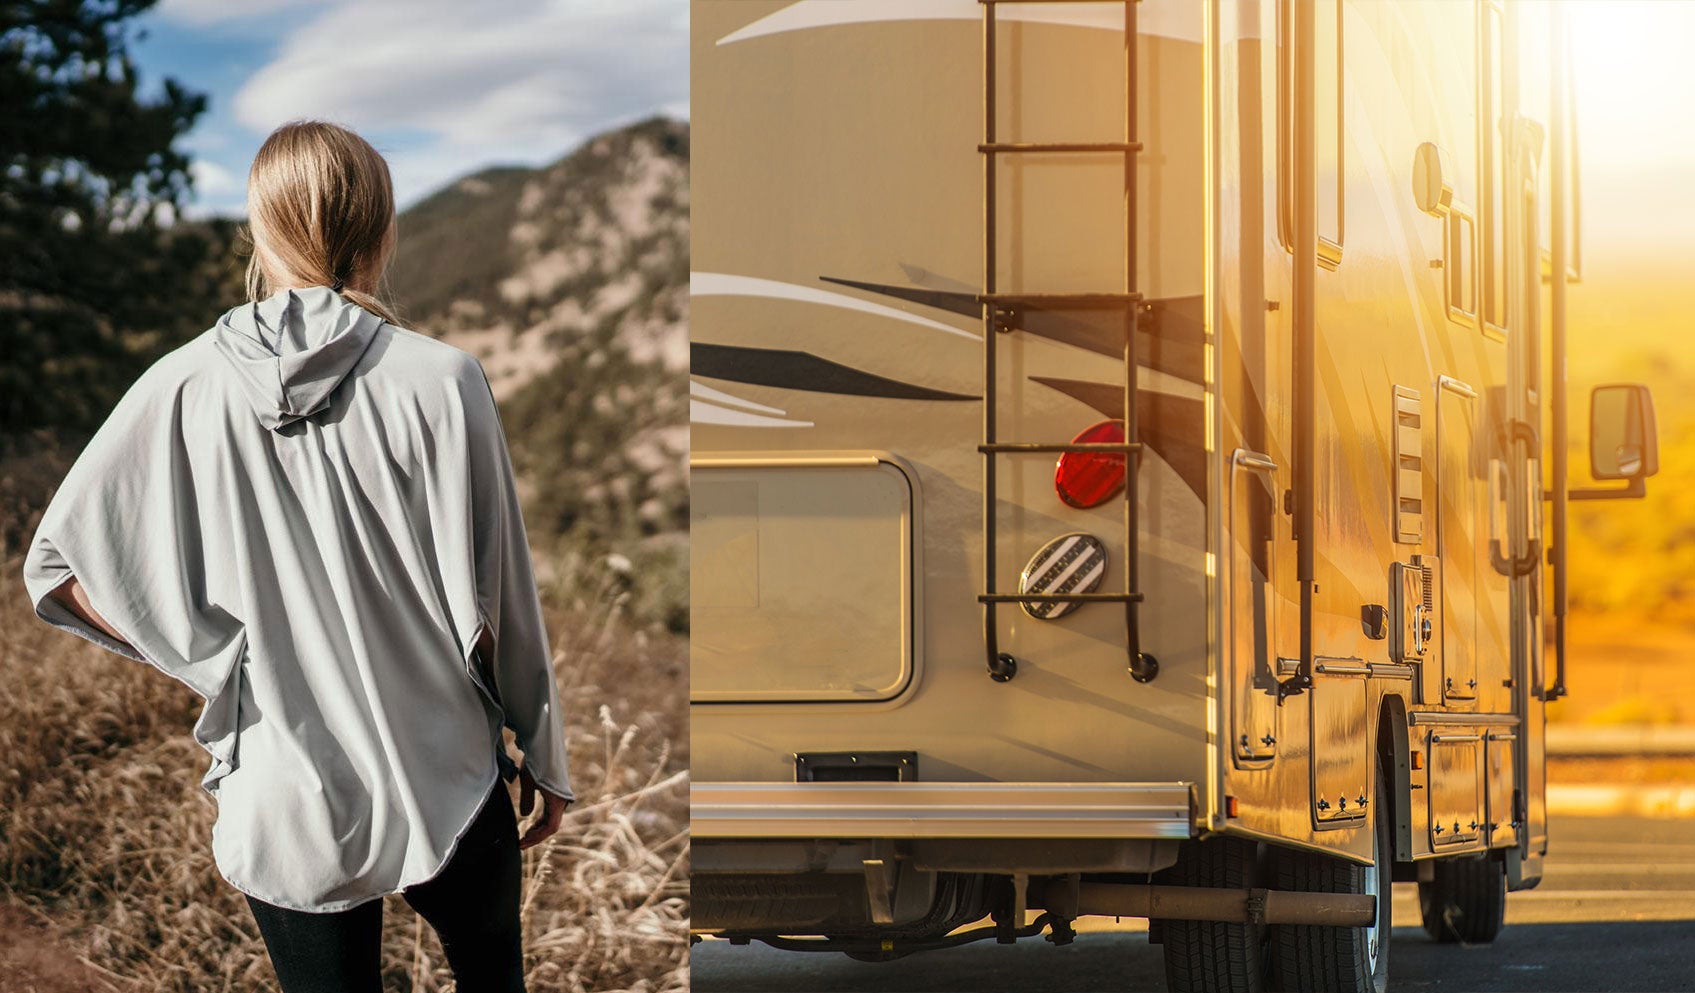 (left) view of woman from behind as she poses in uv protective clothing on the trail (right) back view of large RV at sunset